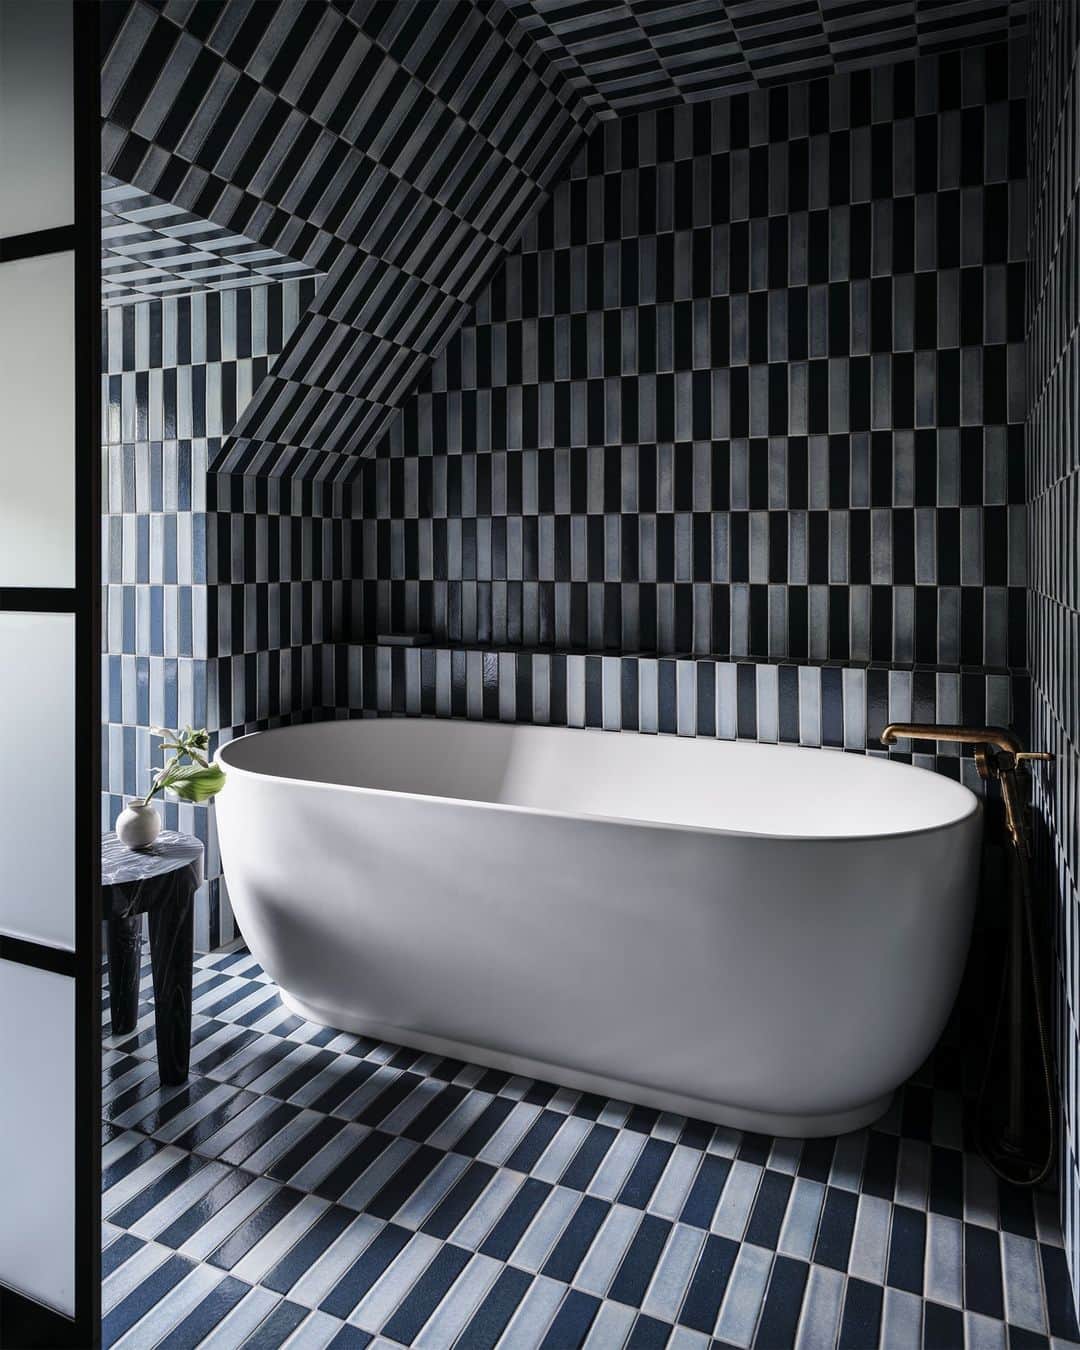 ELLE DECORのインスタグラム：「What day’s troubles couldn’t be resolved, if only for an hour, by a bubble bath in a room as sumptuous as this? This @duravit tub, surrounded by a graphic checkered tile motif, is the stuff of Kelly Wearstler-approved (@kellywearstler) design magic. Bring on the bubbles!  Click the link in the bio to tour the rest of this Toronto home, as featured in our November 2023 issue. Written by @laurenomics. Photographed by @a_gaut. Architecture by @lornerosearch.」